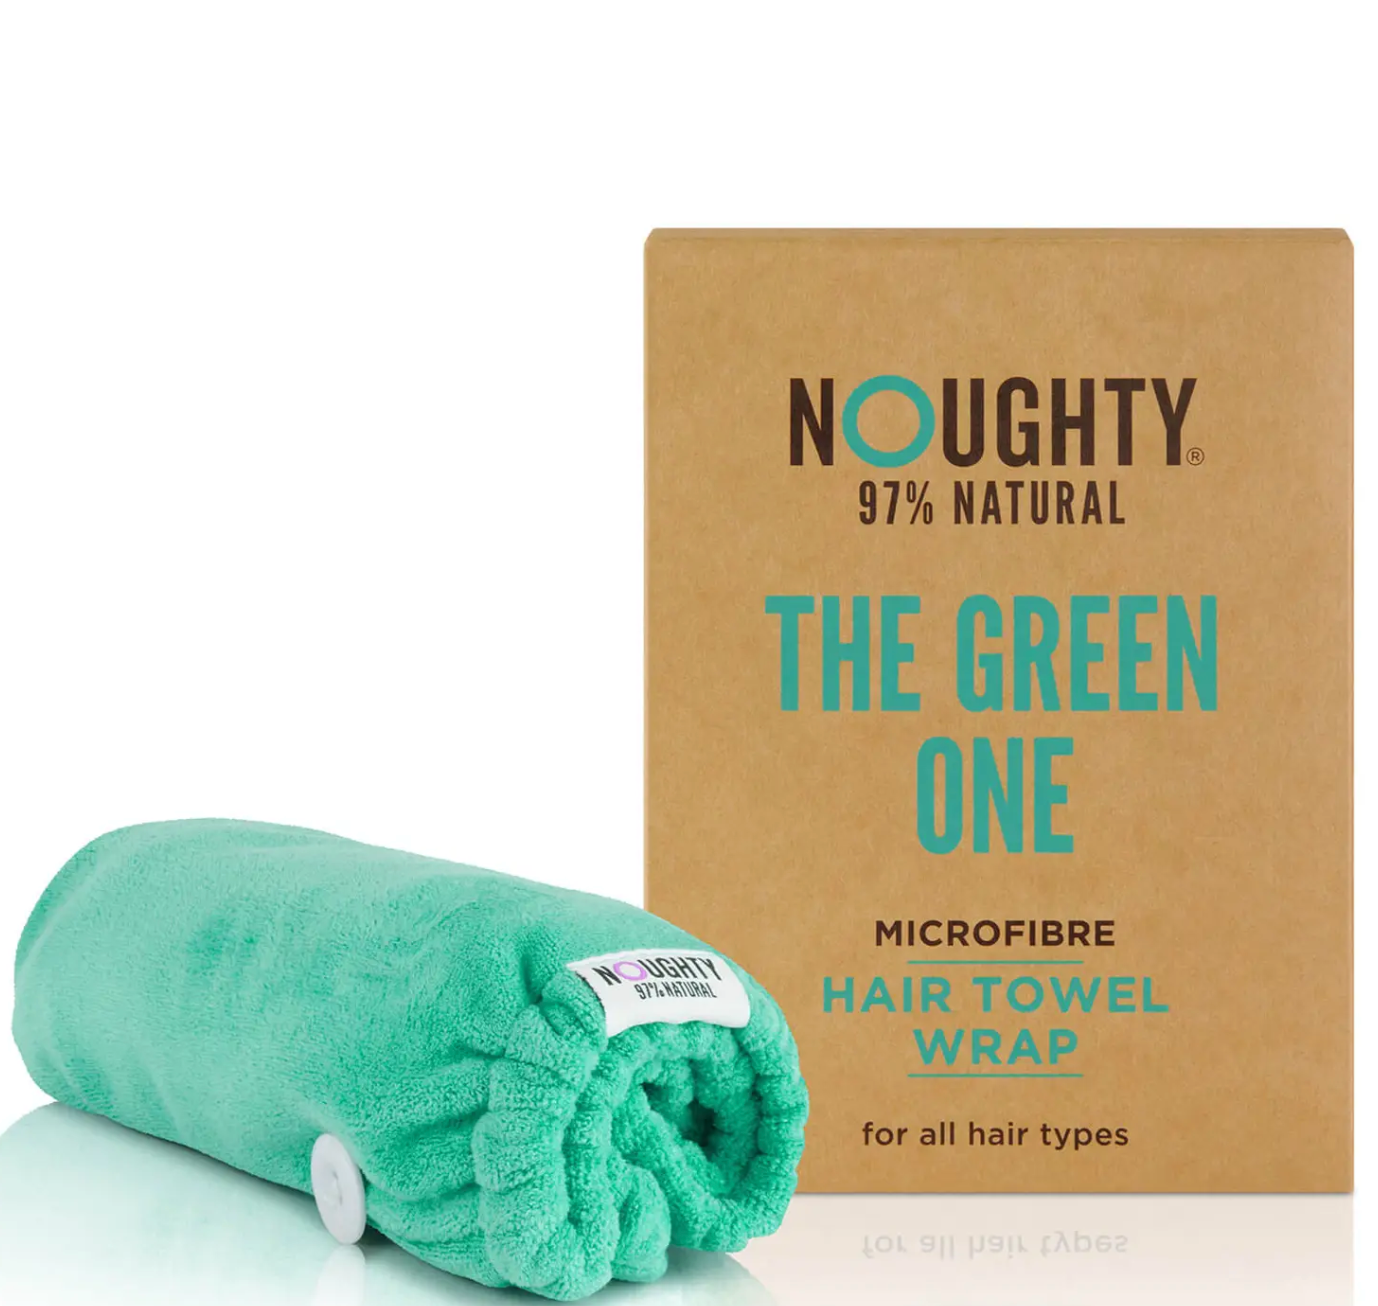 Noughty - Microfibre Hair Towel Wrap - The Green One